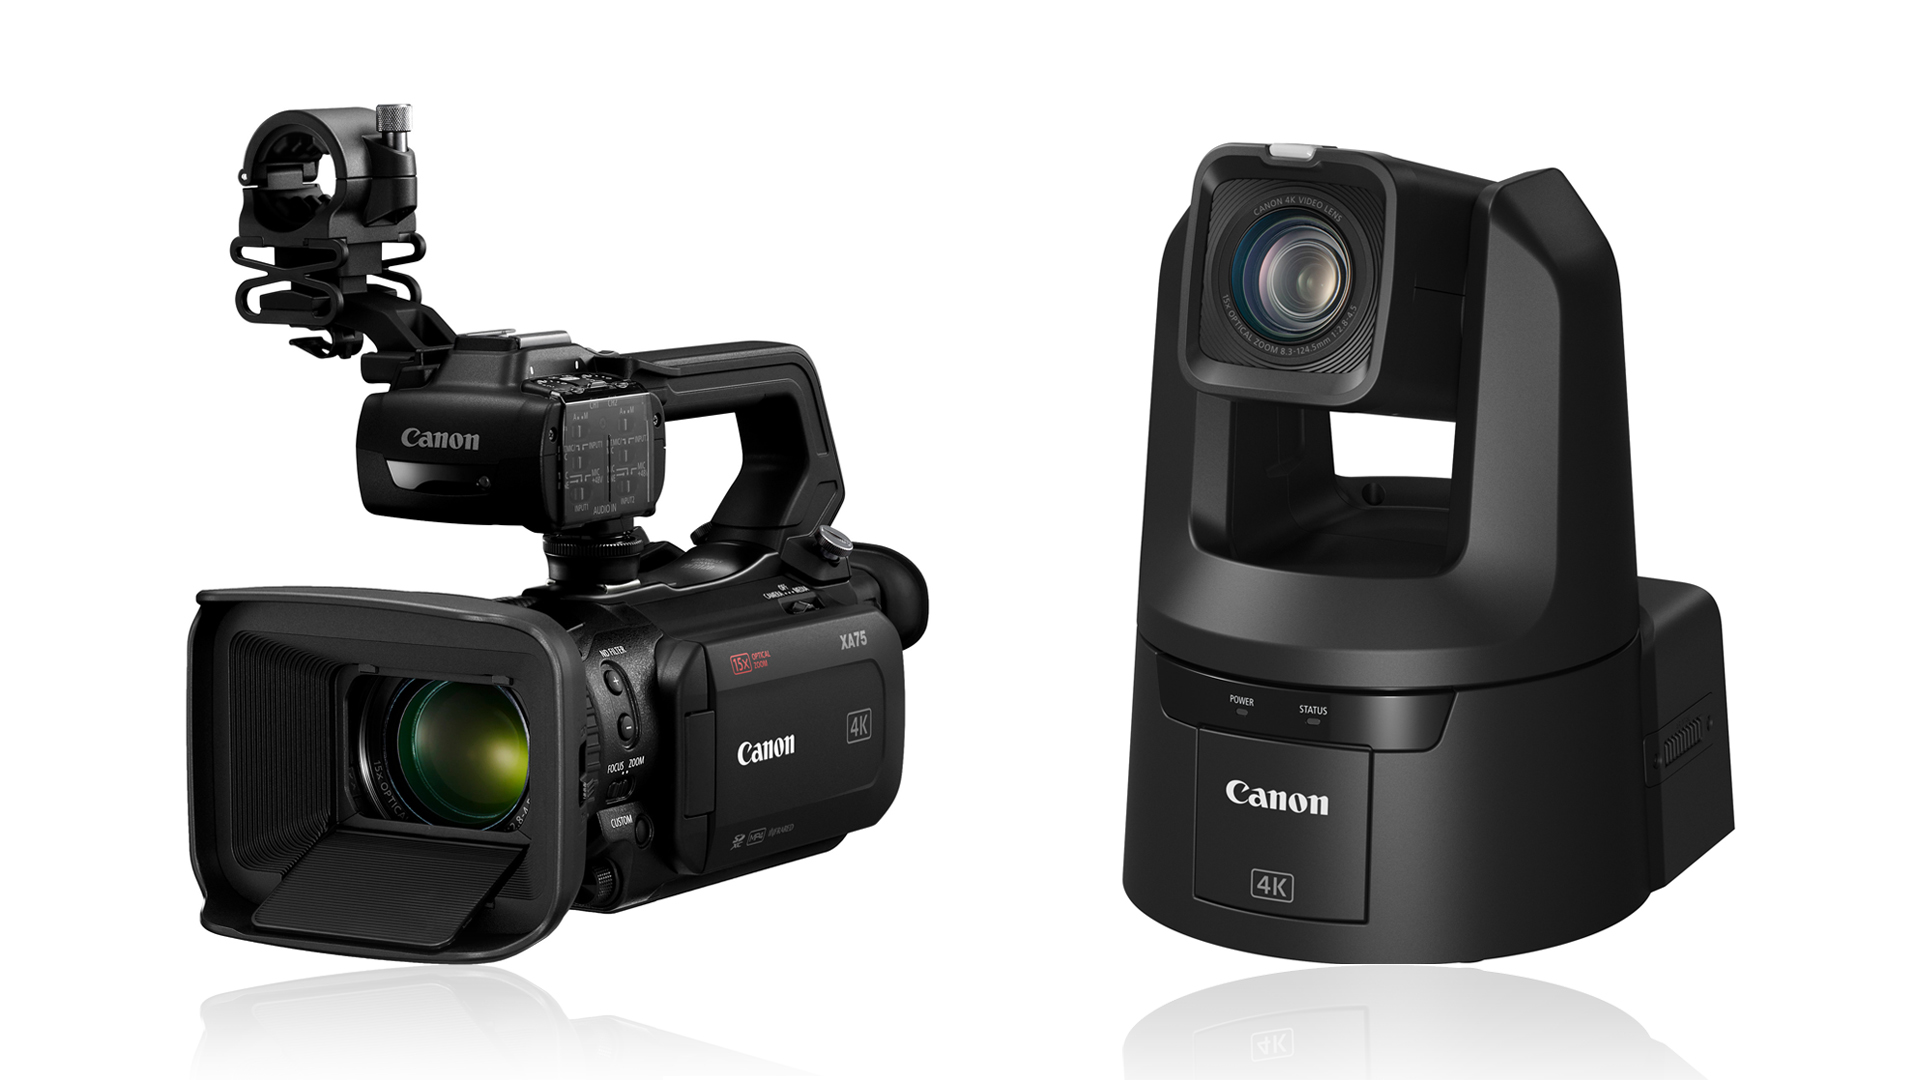 Panasonic unveils camcorders with built-in live streaming